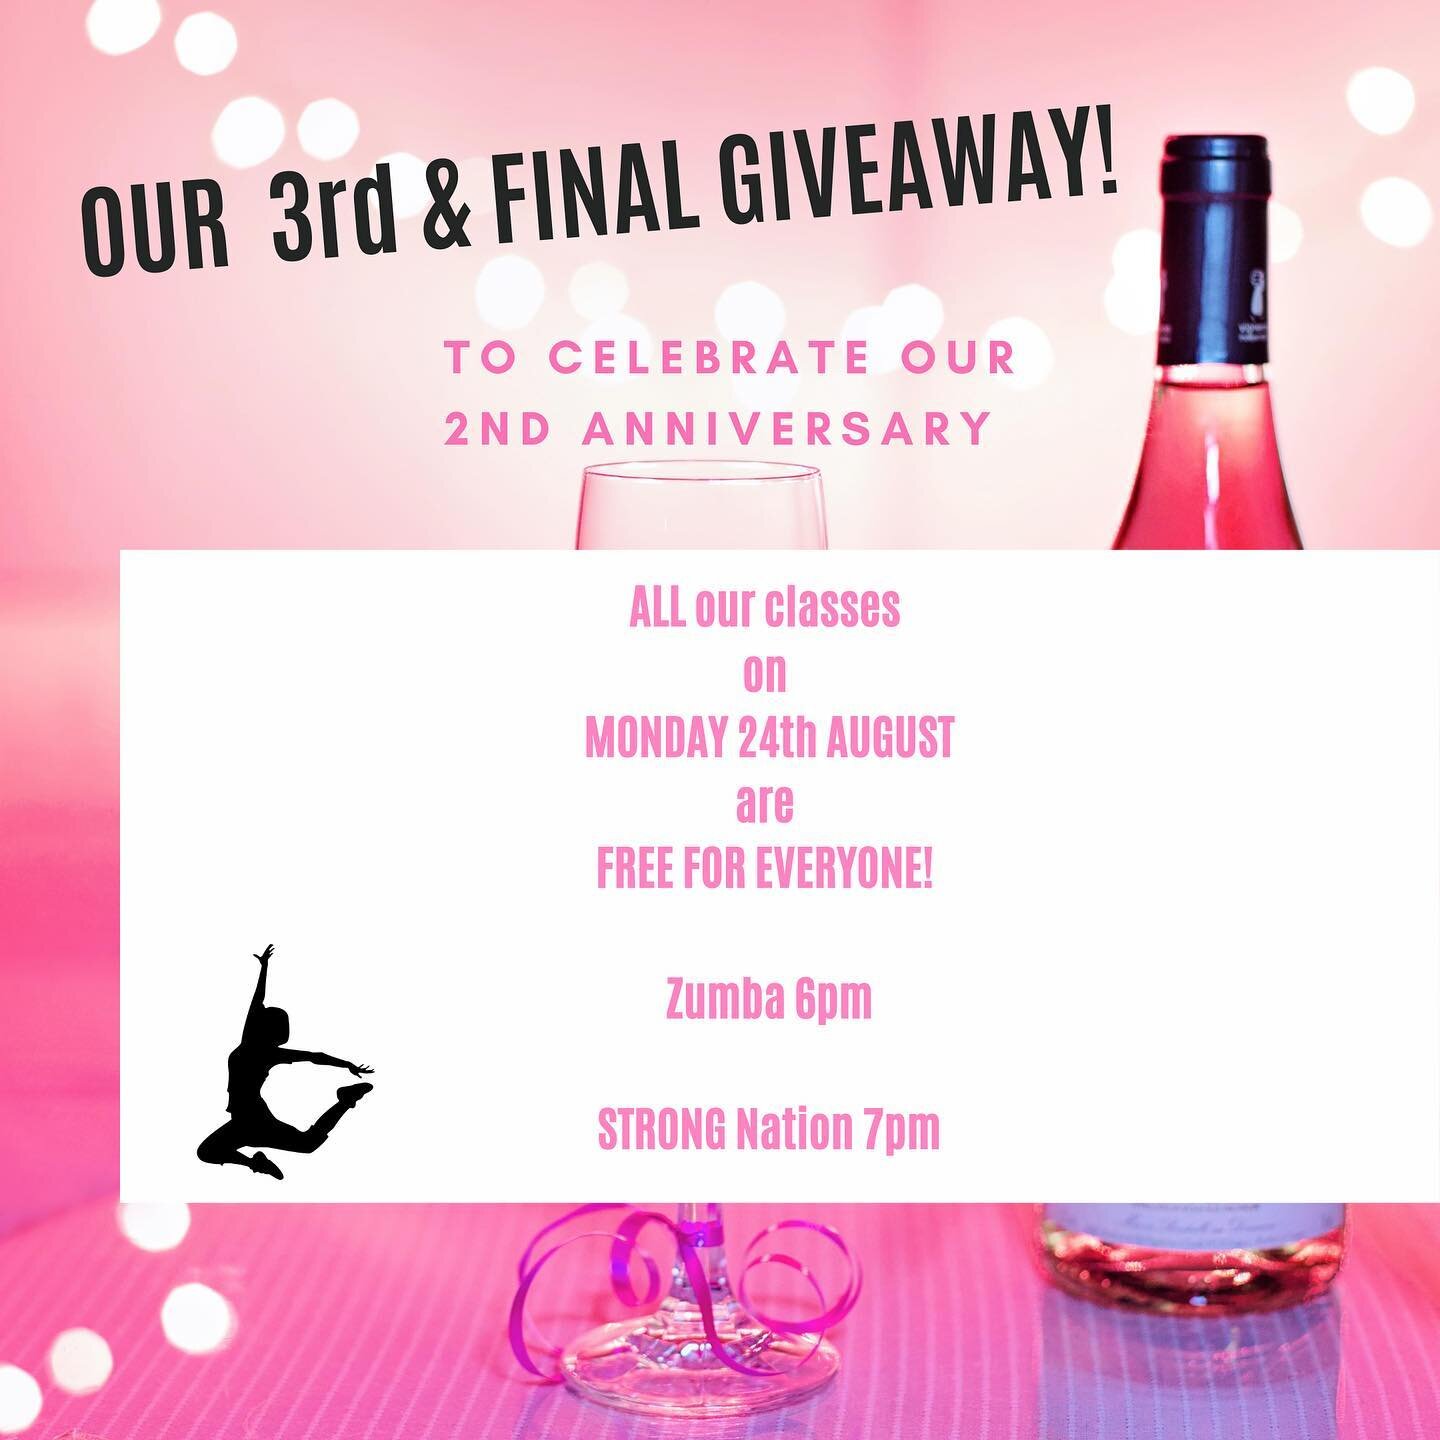 🌟🌟 OUR 3rd and FINAL GIVEAWAY 🌟🌟

To celebrate our 2nd Anniversary I would like to offer our Monday Classes, FREE, to everyone! 

This is your chance to try an online fitness class from the comfort of your own home. There is no one else in the ro